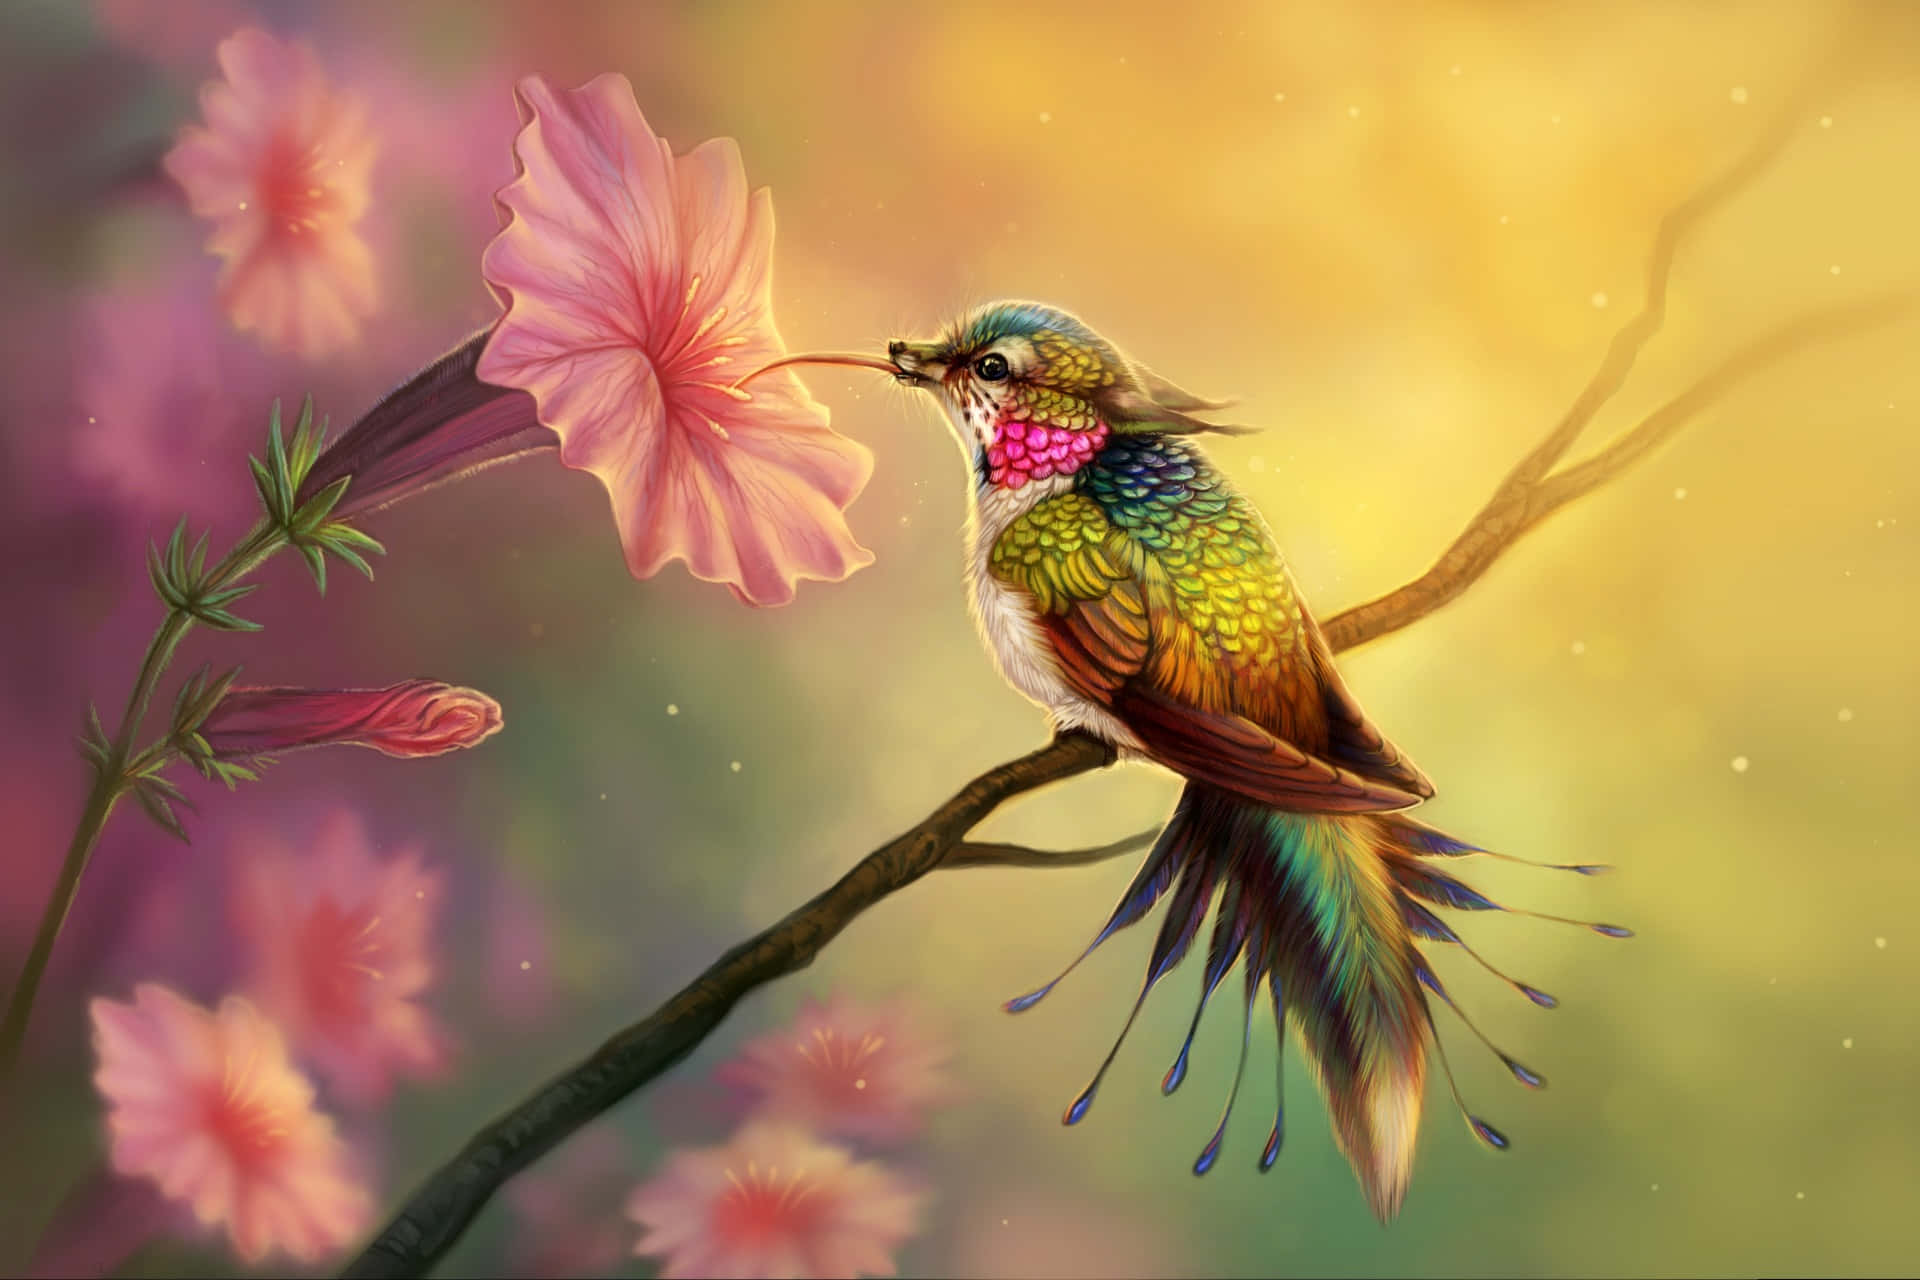 An exquisite hummingbird perched on a branch surrounded by blossoms